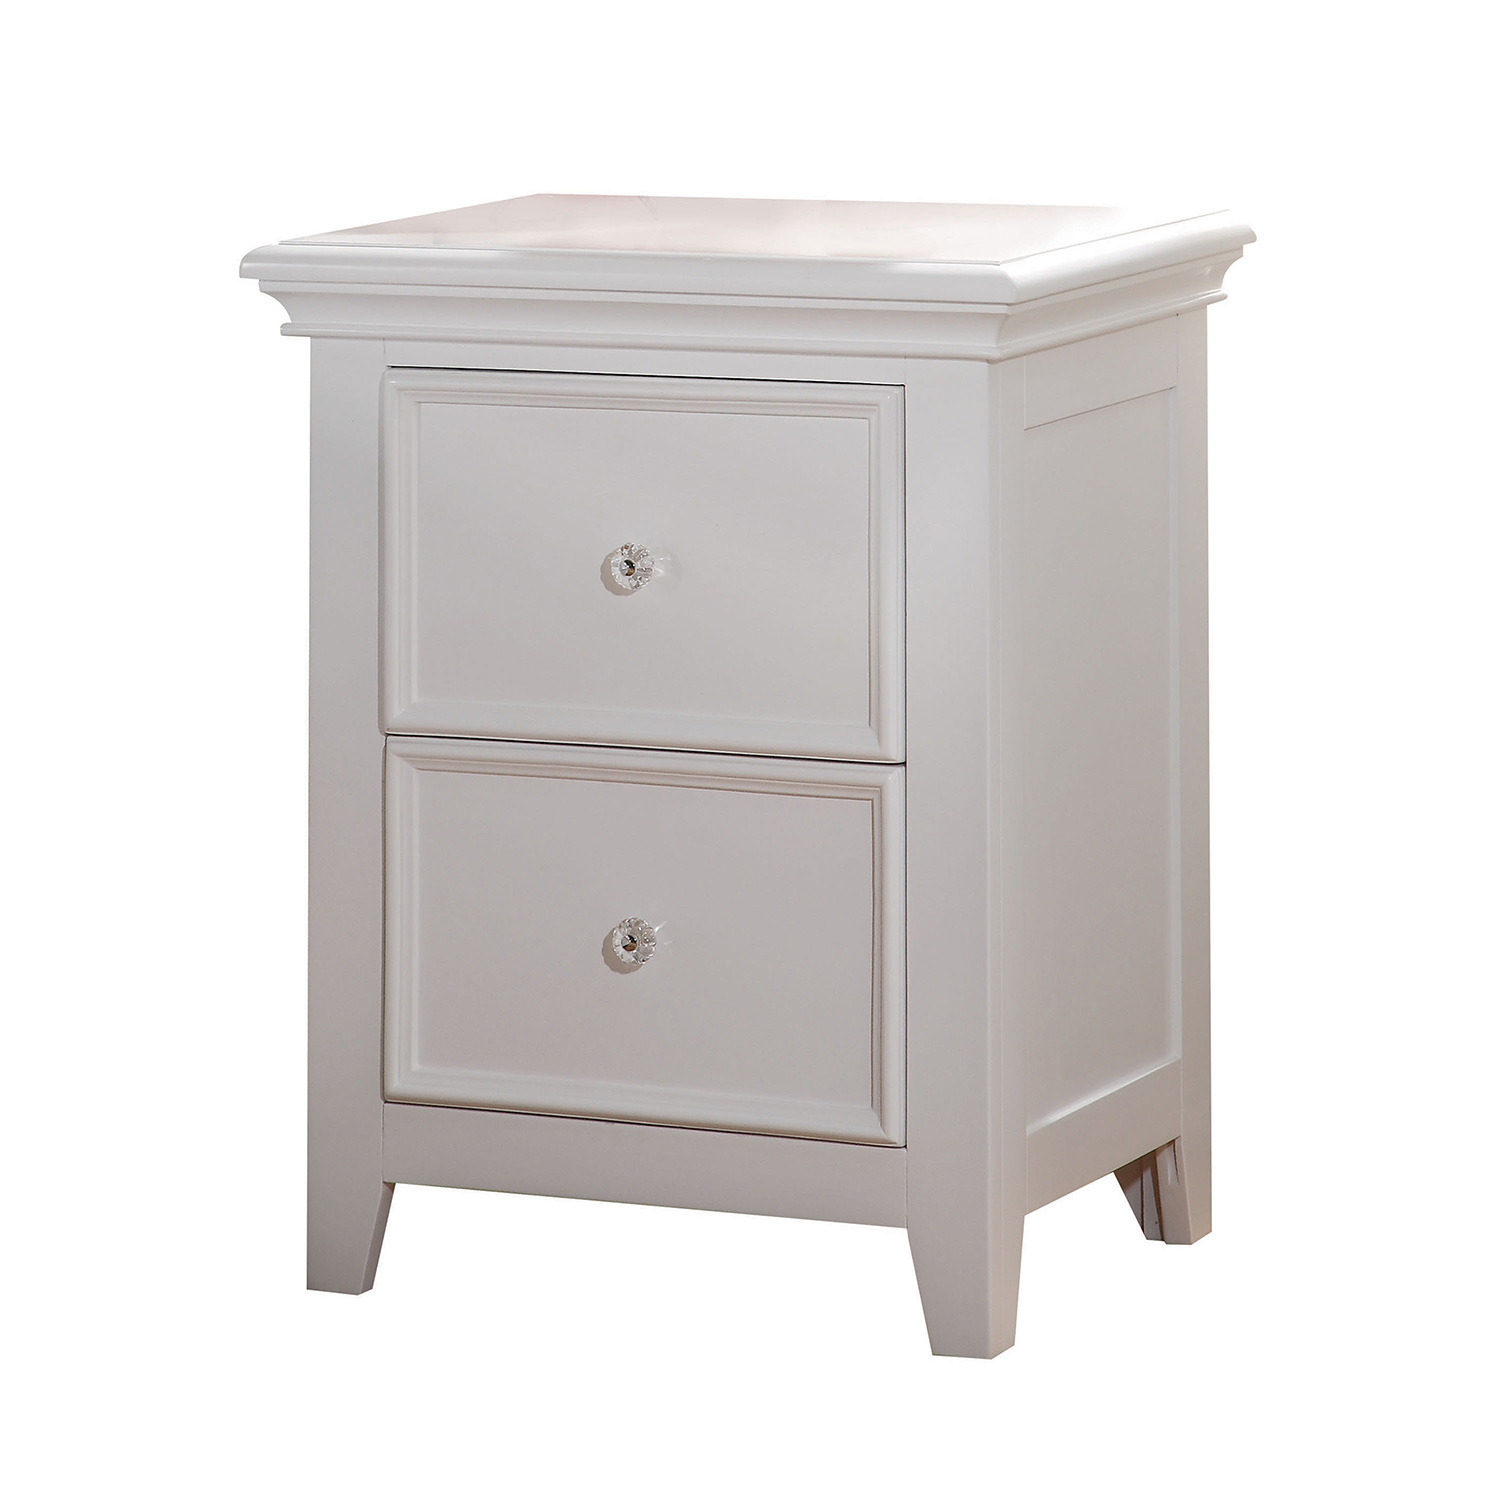 Acme Lacey Nightstand with 2 Drawer - White